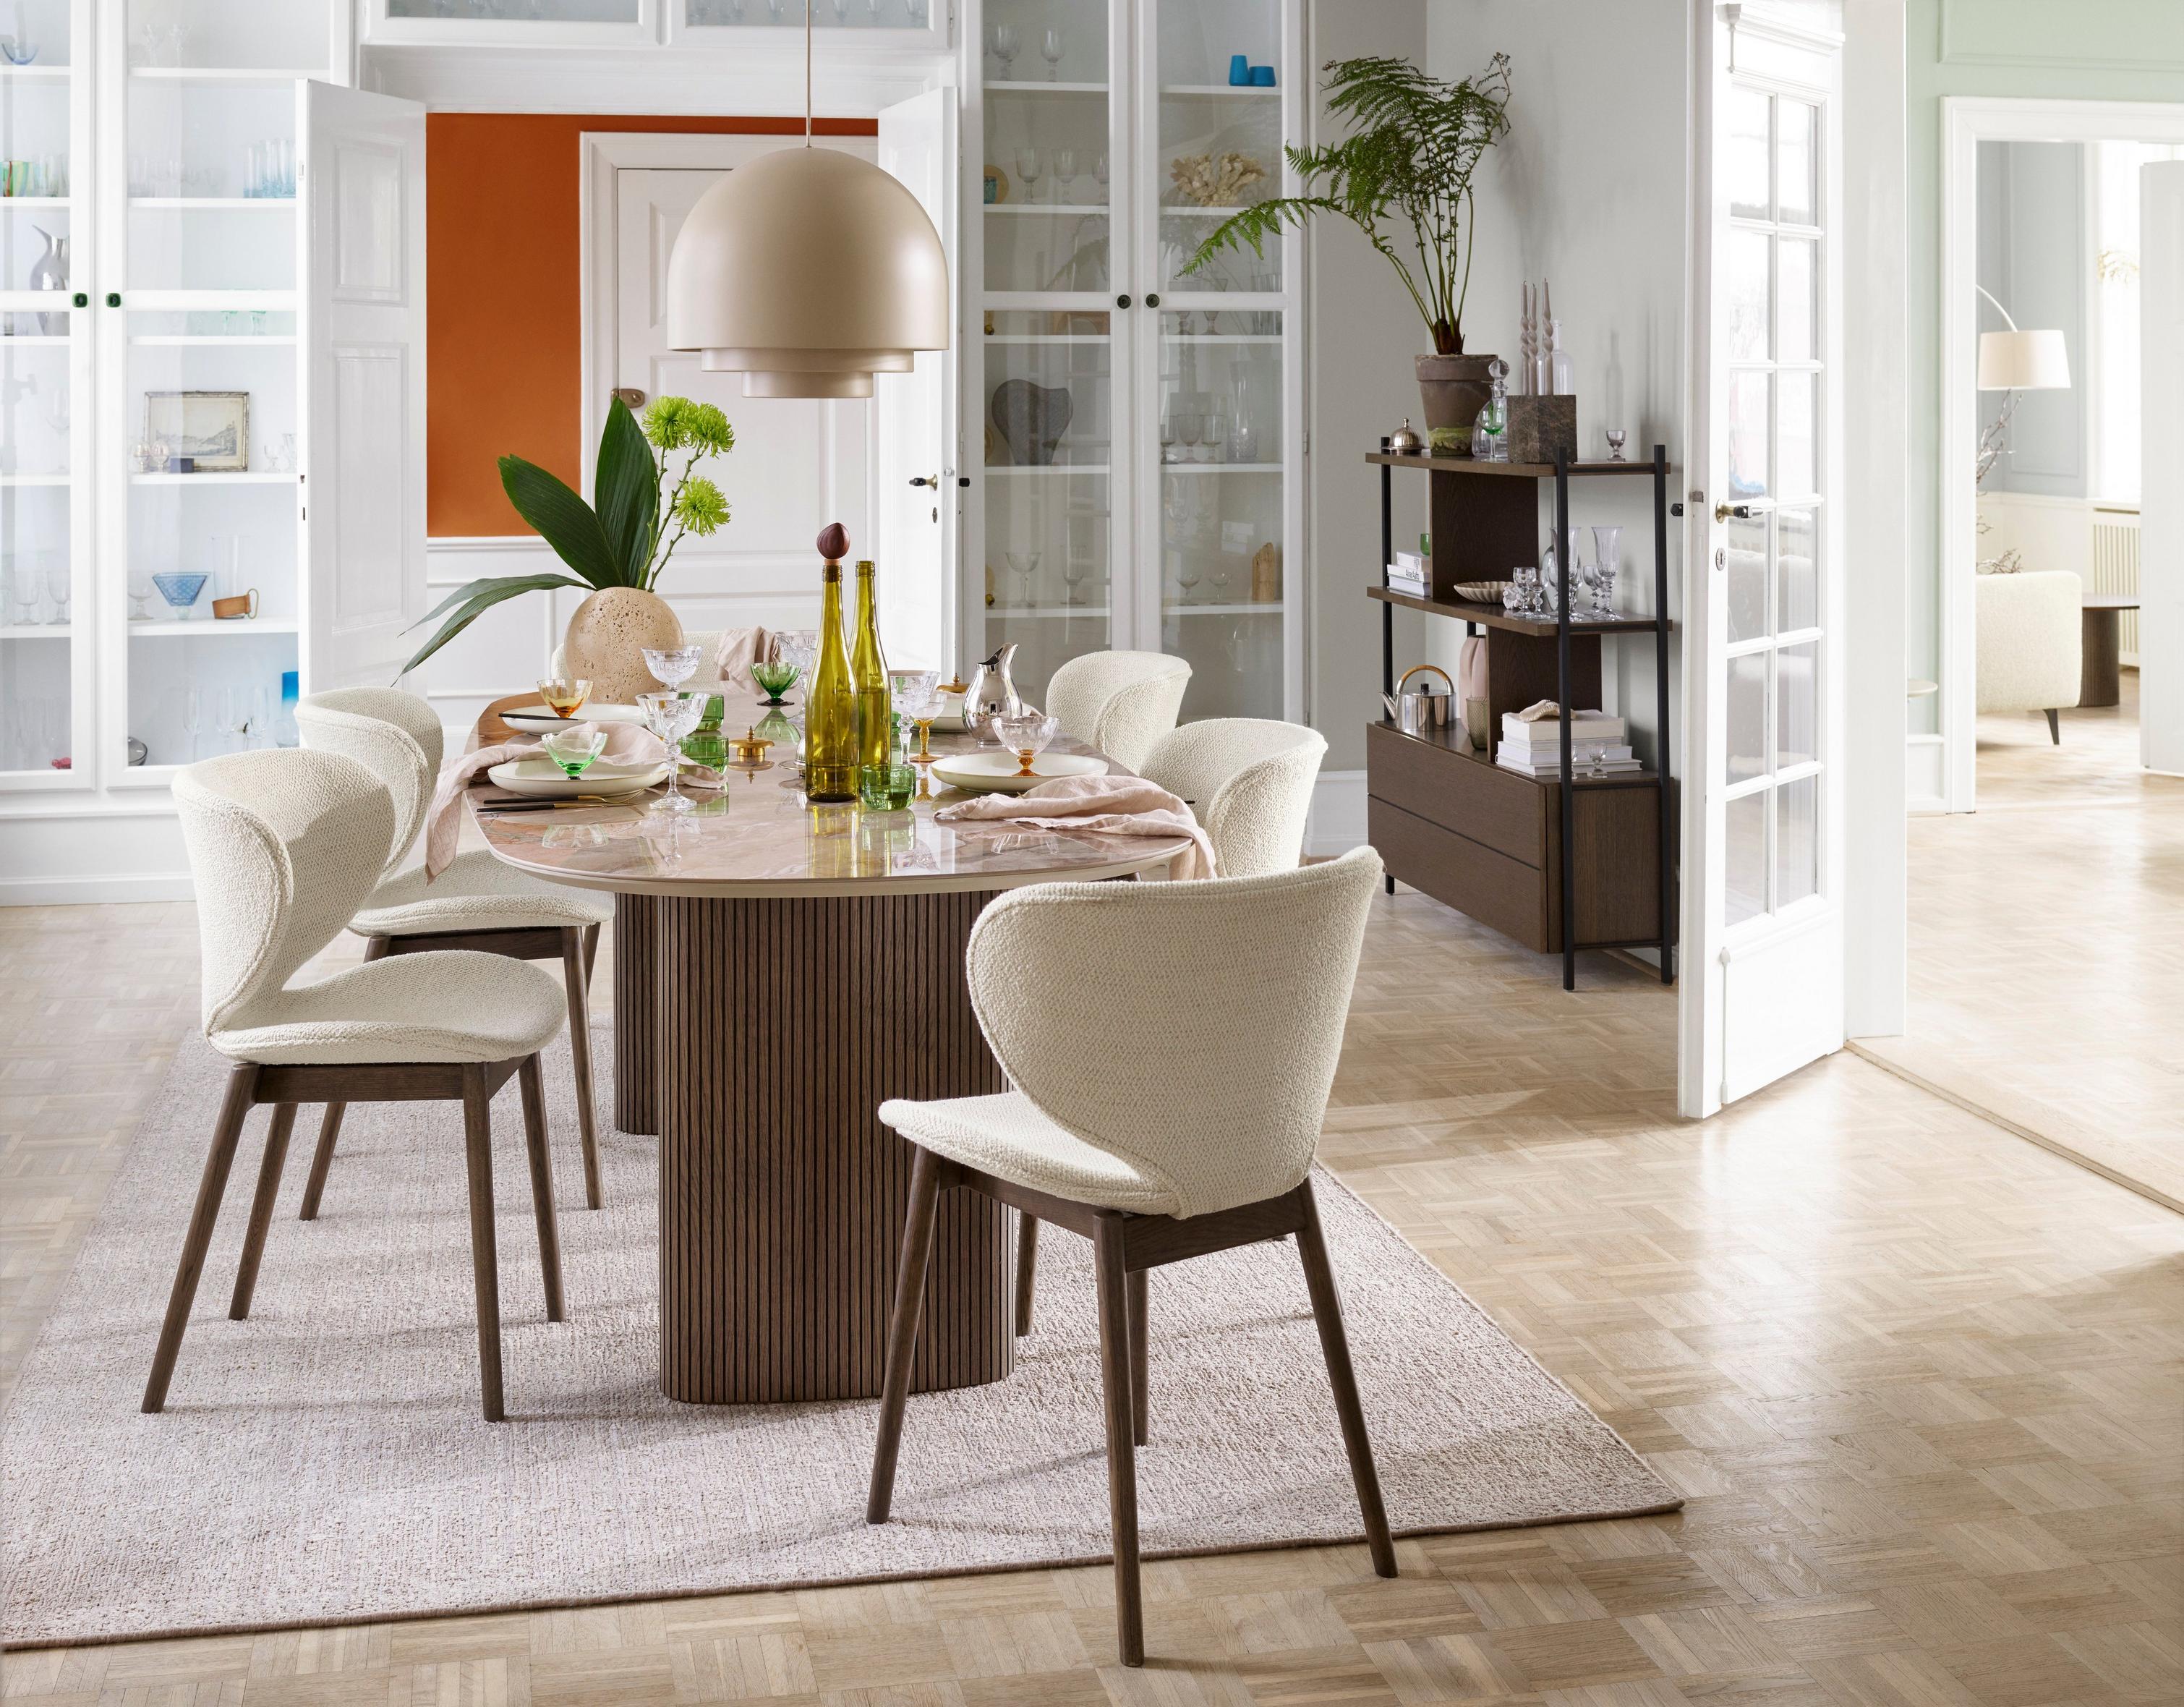 Scandinavian-style dining room with the Santiago dining table in brown ceramic